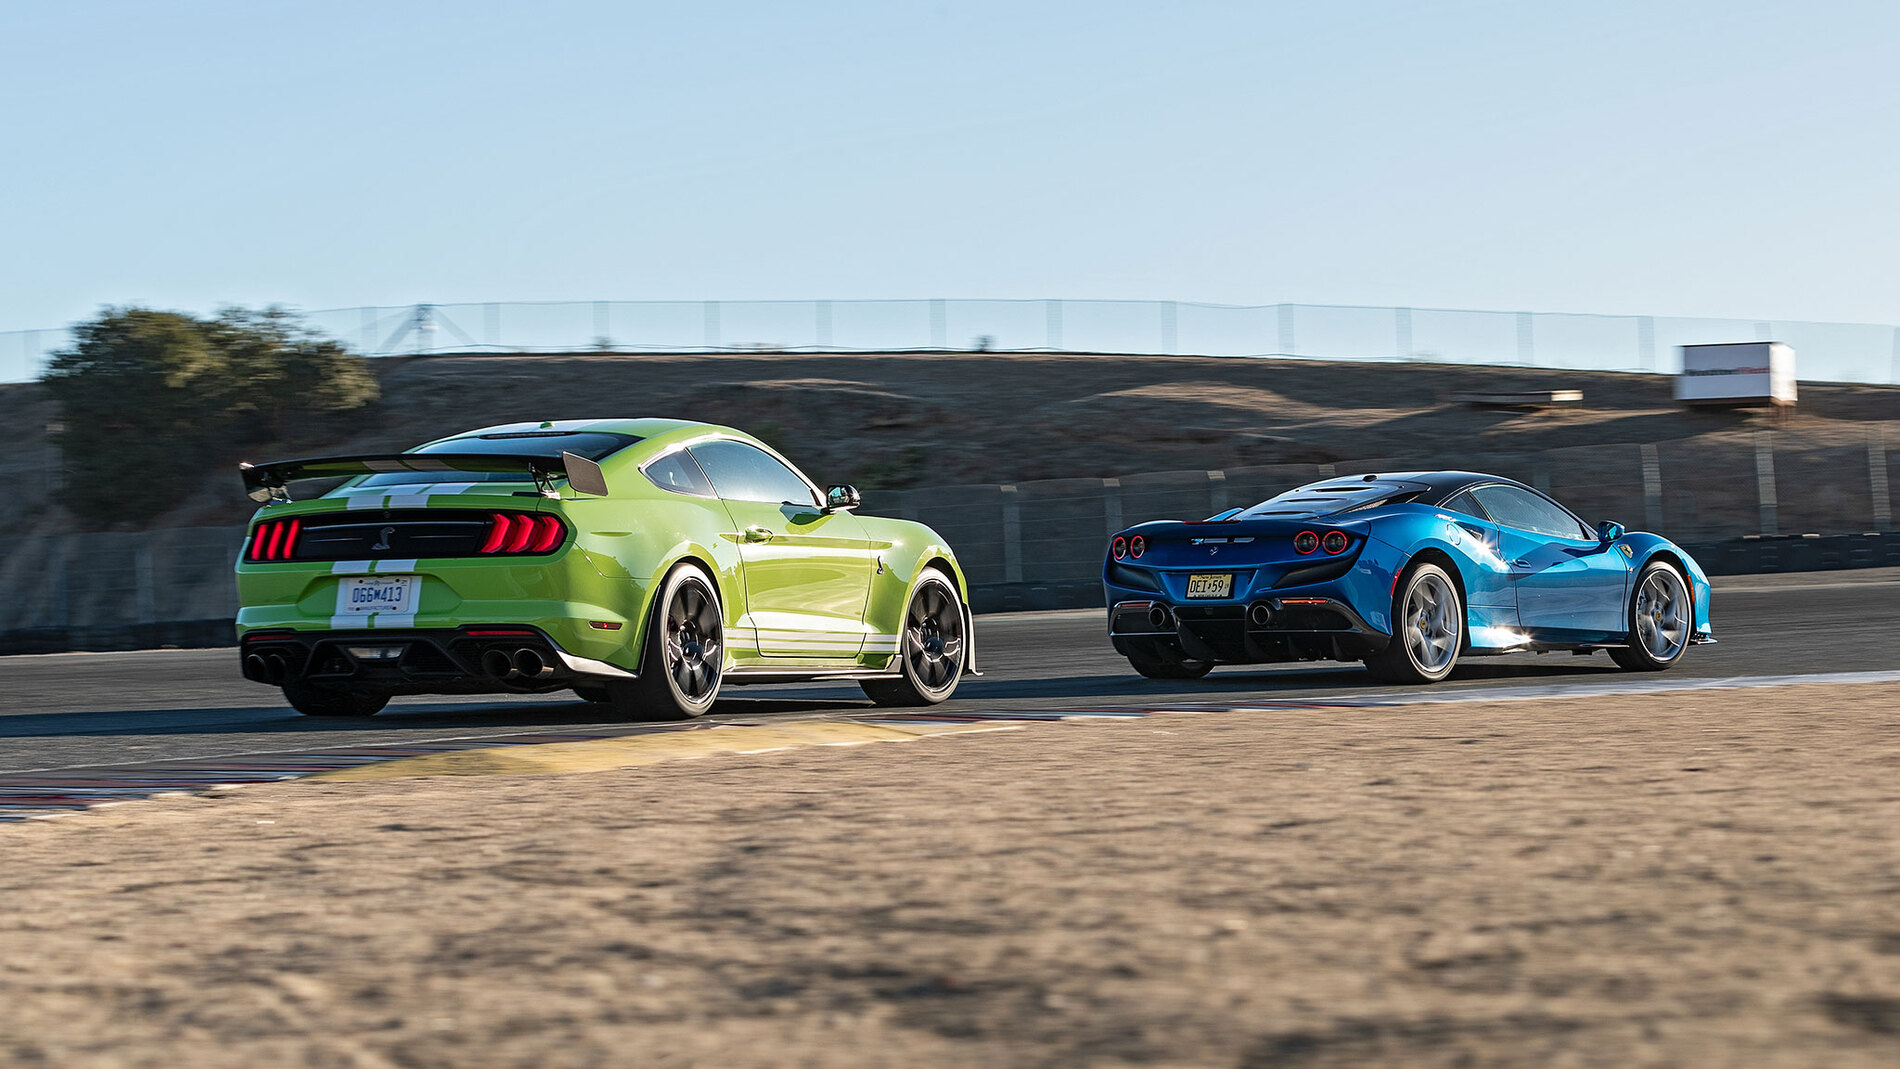 2020-Ford-Mustang-Shelby-GT500-18.jpg